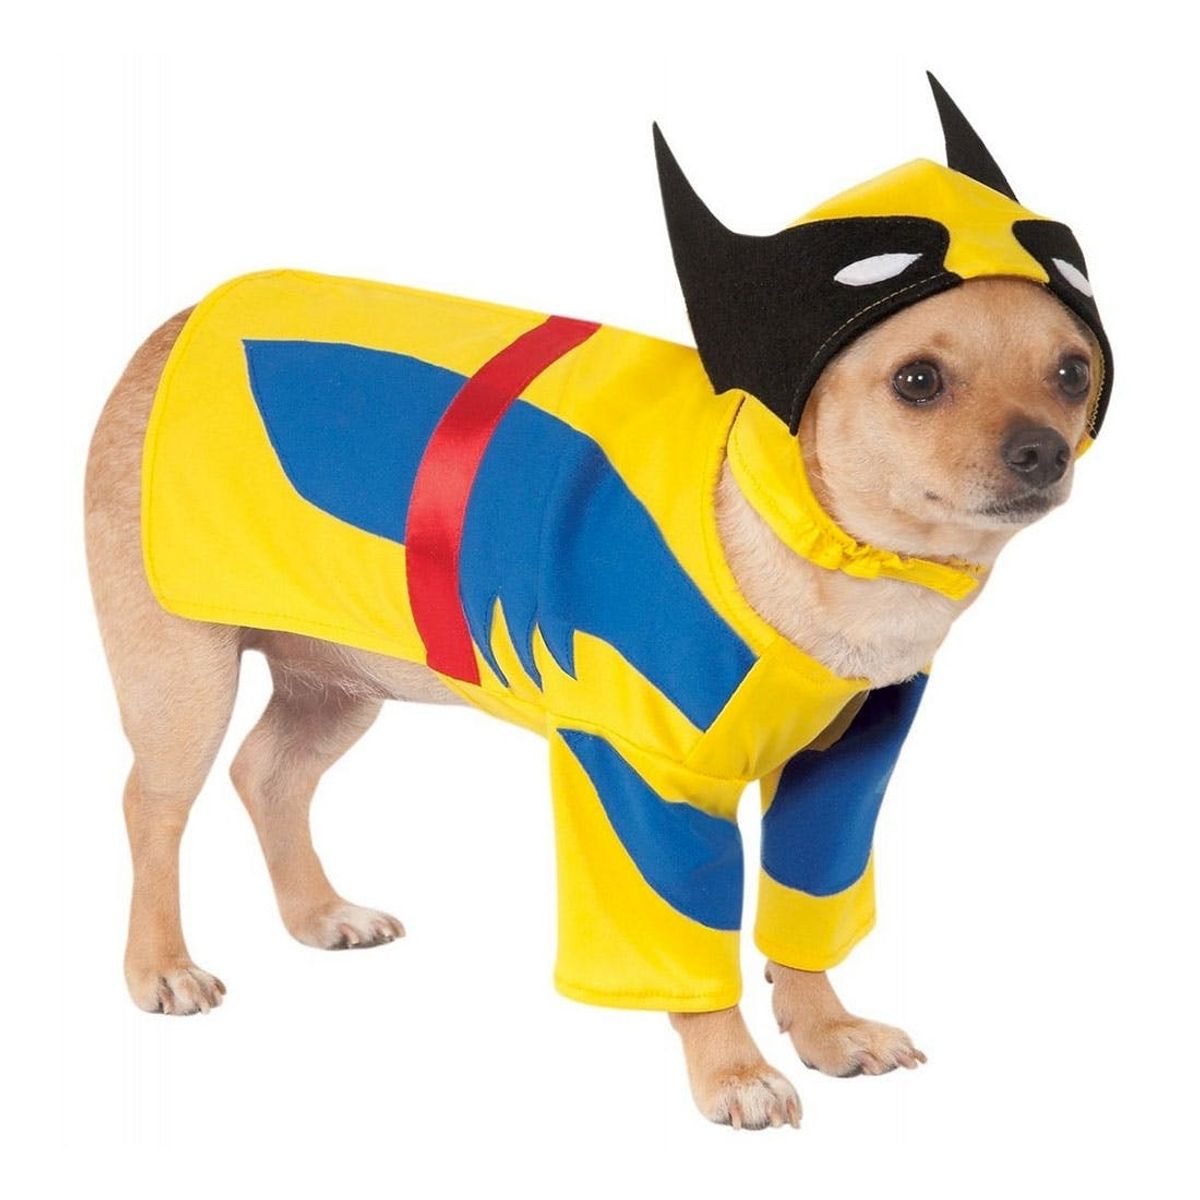 20 Superhero Halloween Costumes for Kids, Grown-Ups *AND* Dogs!